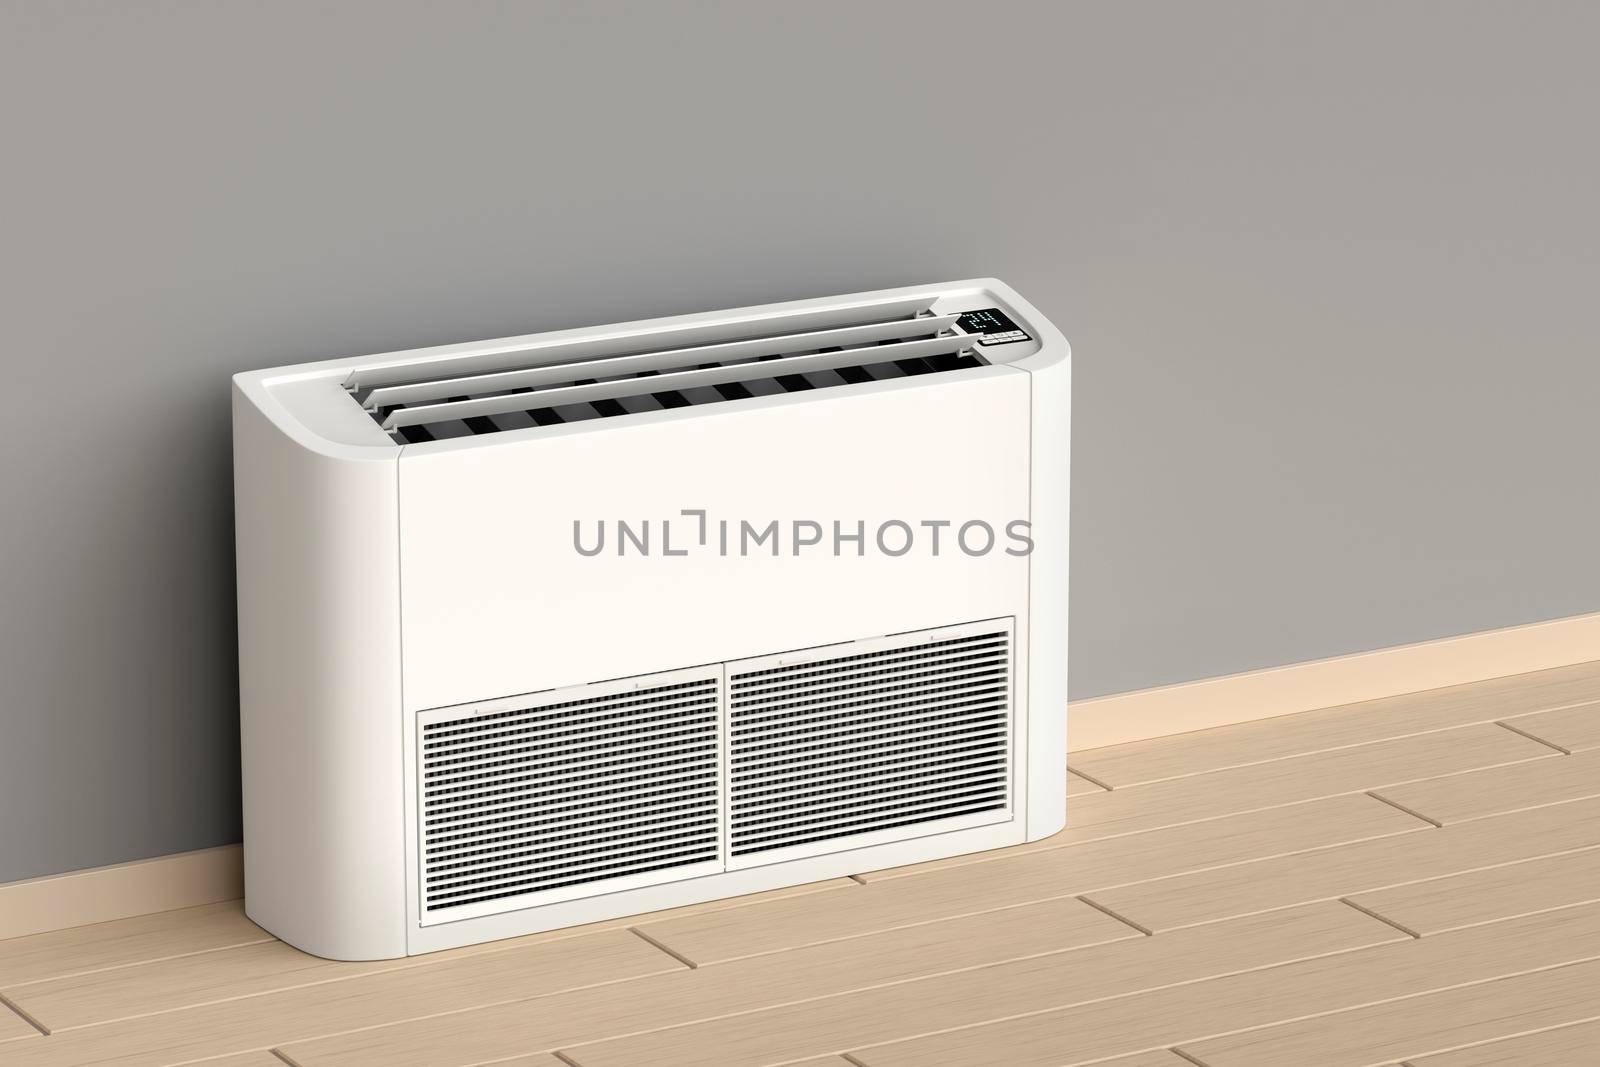 Floor mounted air conditioner by magraphics